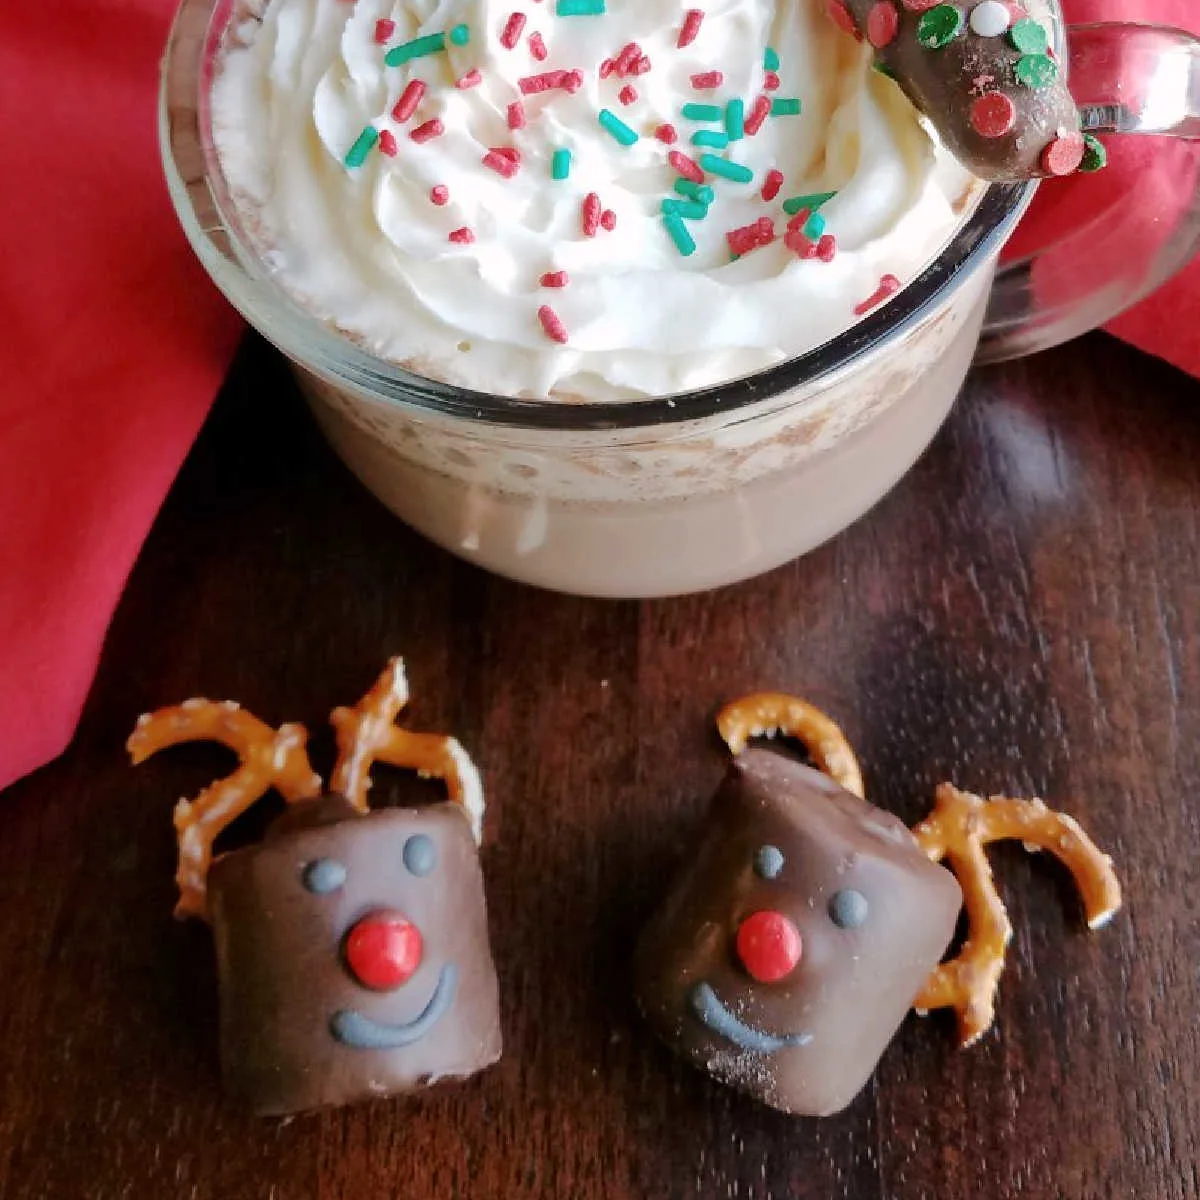 Chocolate dipped marshmallows decorated to look like rudolph next to mug of hot chocolate topped with whipped cream and sprinkles.